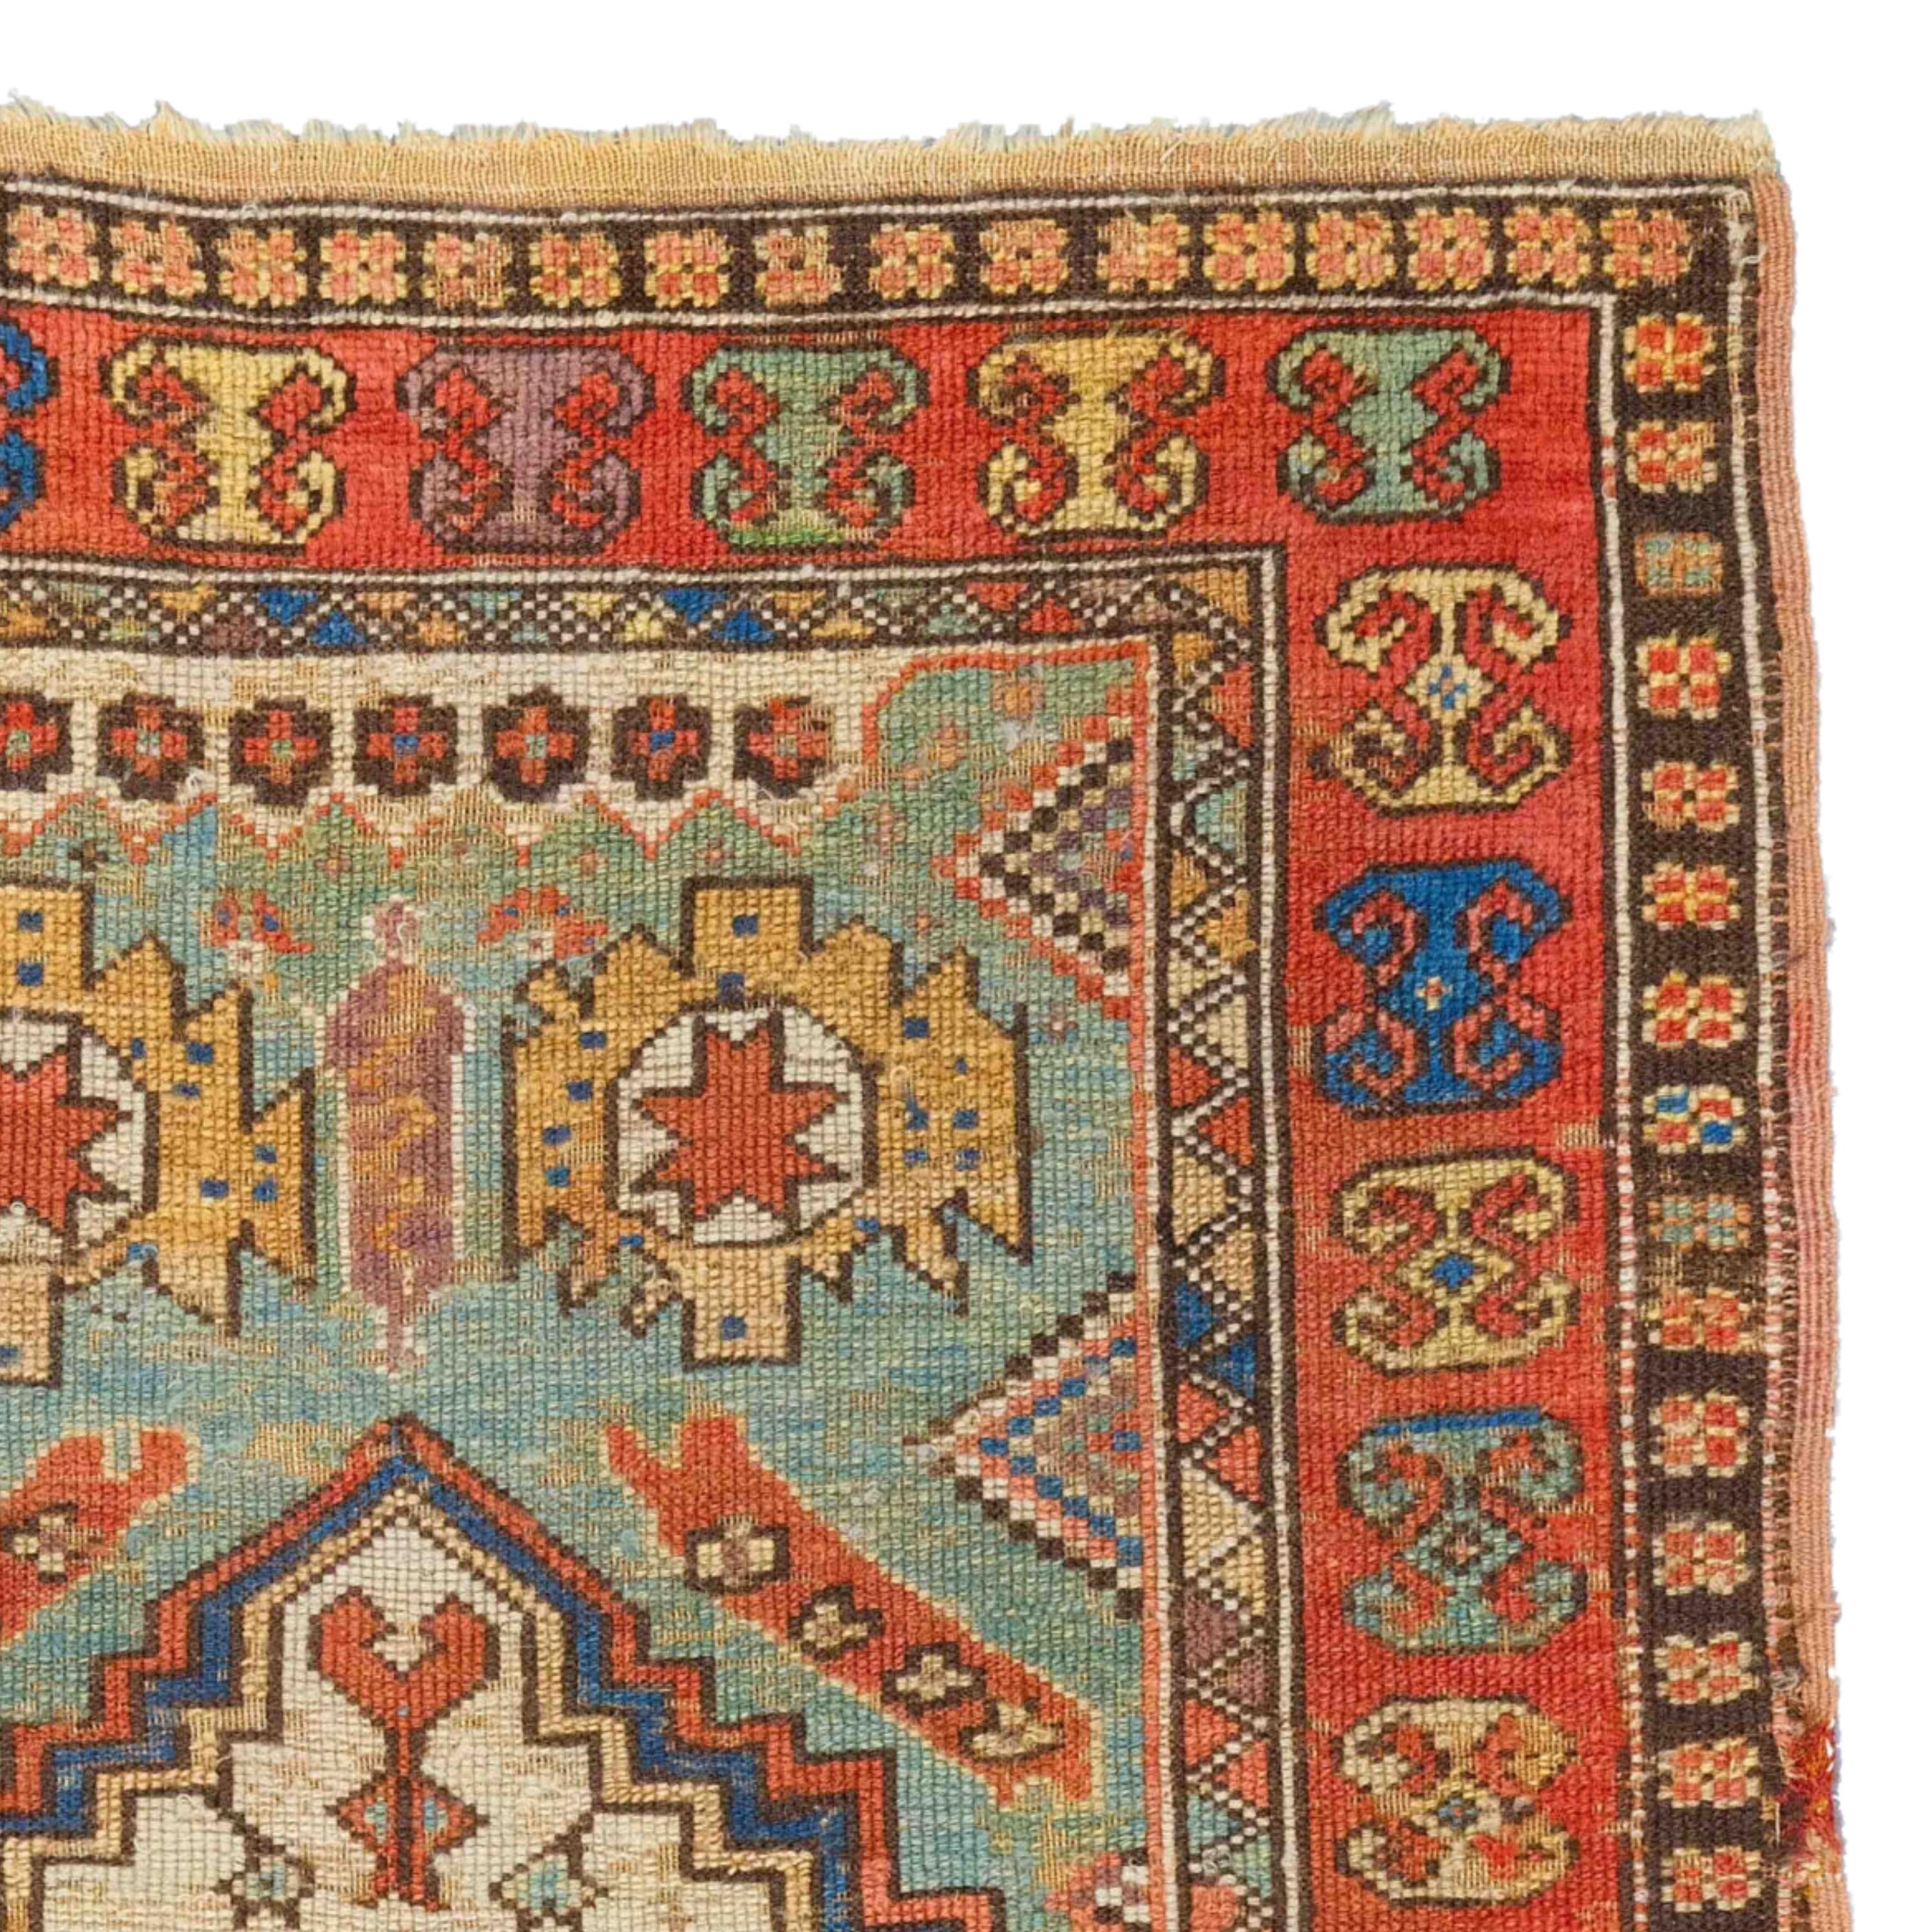 Antique Konya Rug - Early 19th Century Central Anatolian Konya Prayer Rug In Good Condition For Sale In Sultanahmet, 34